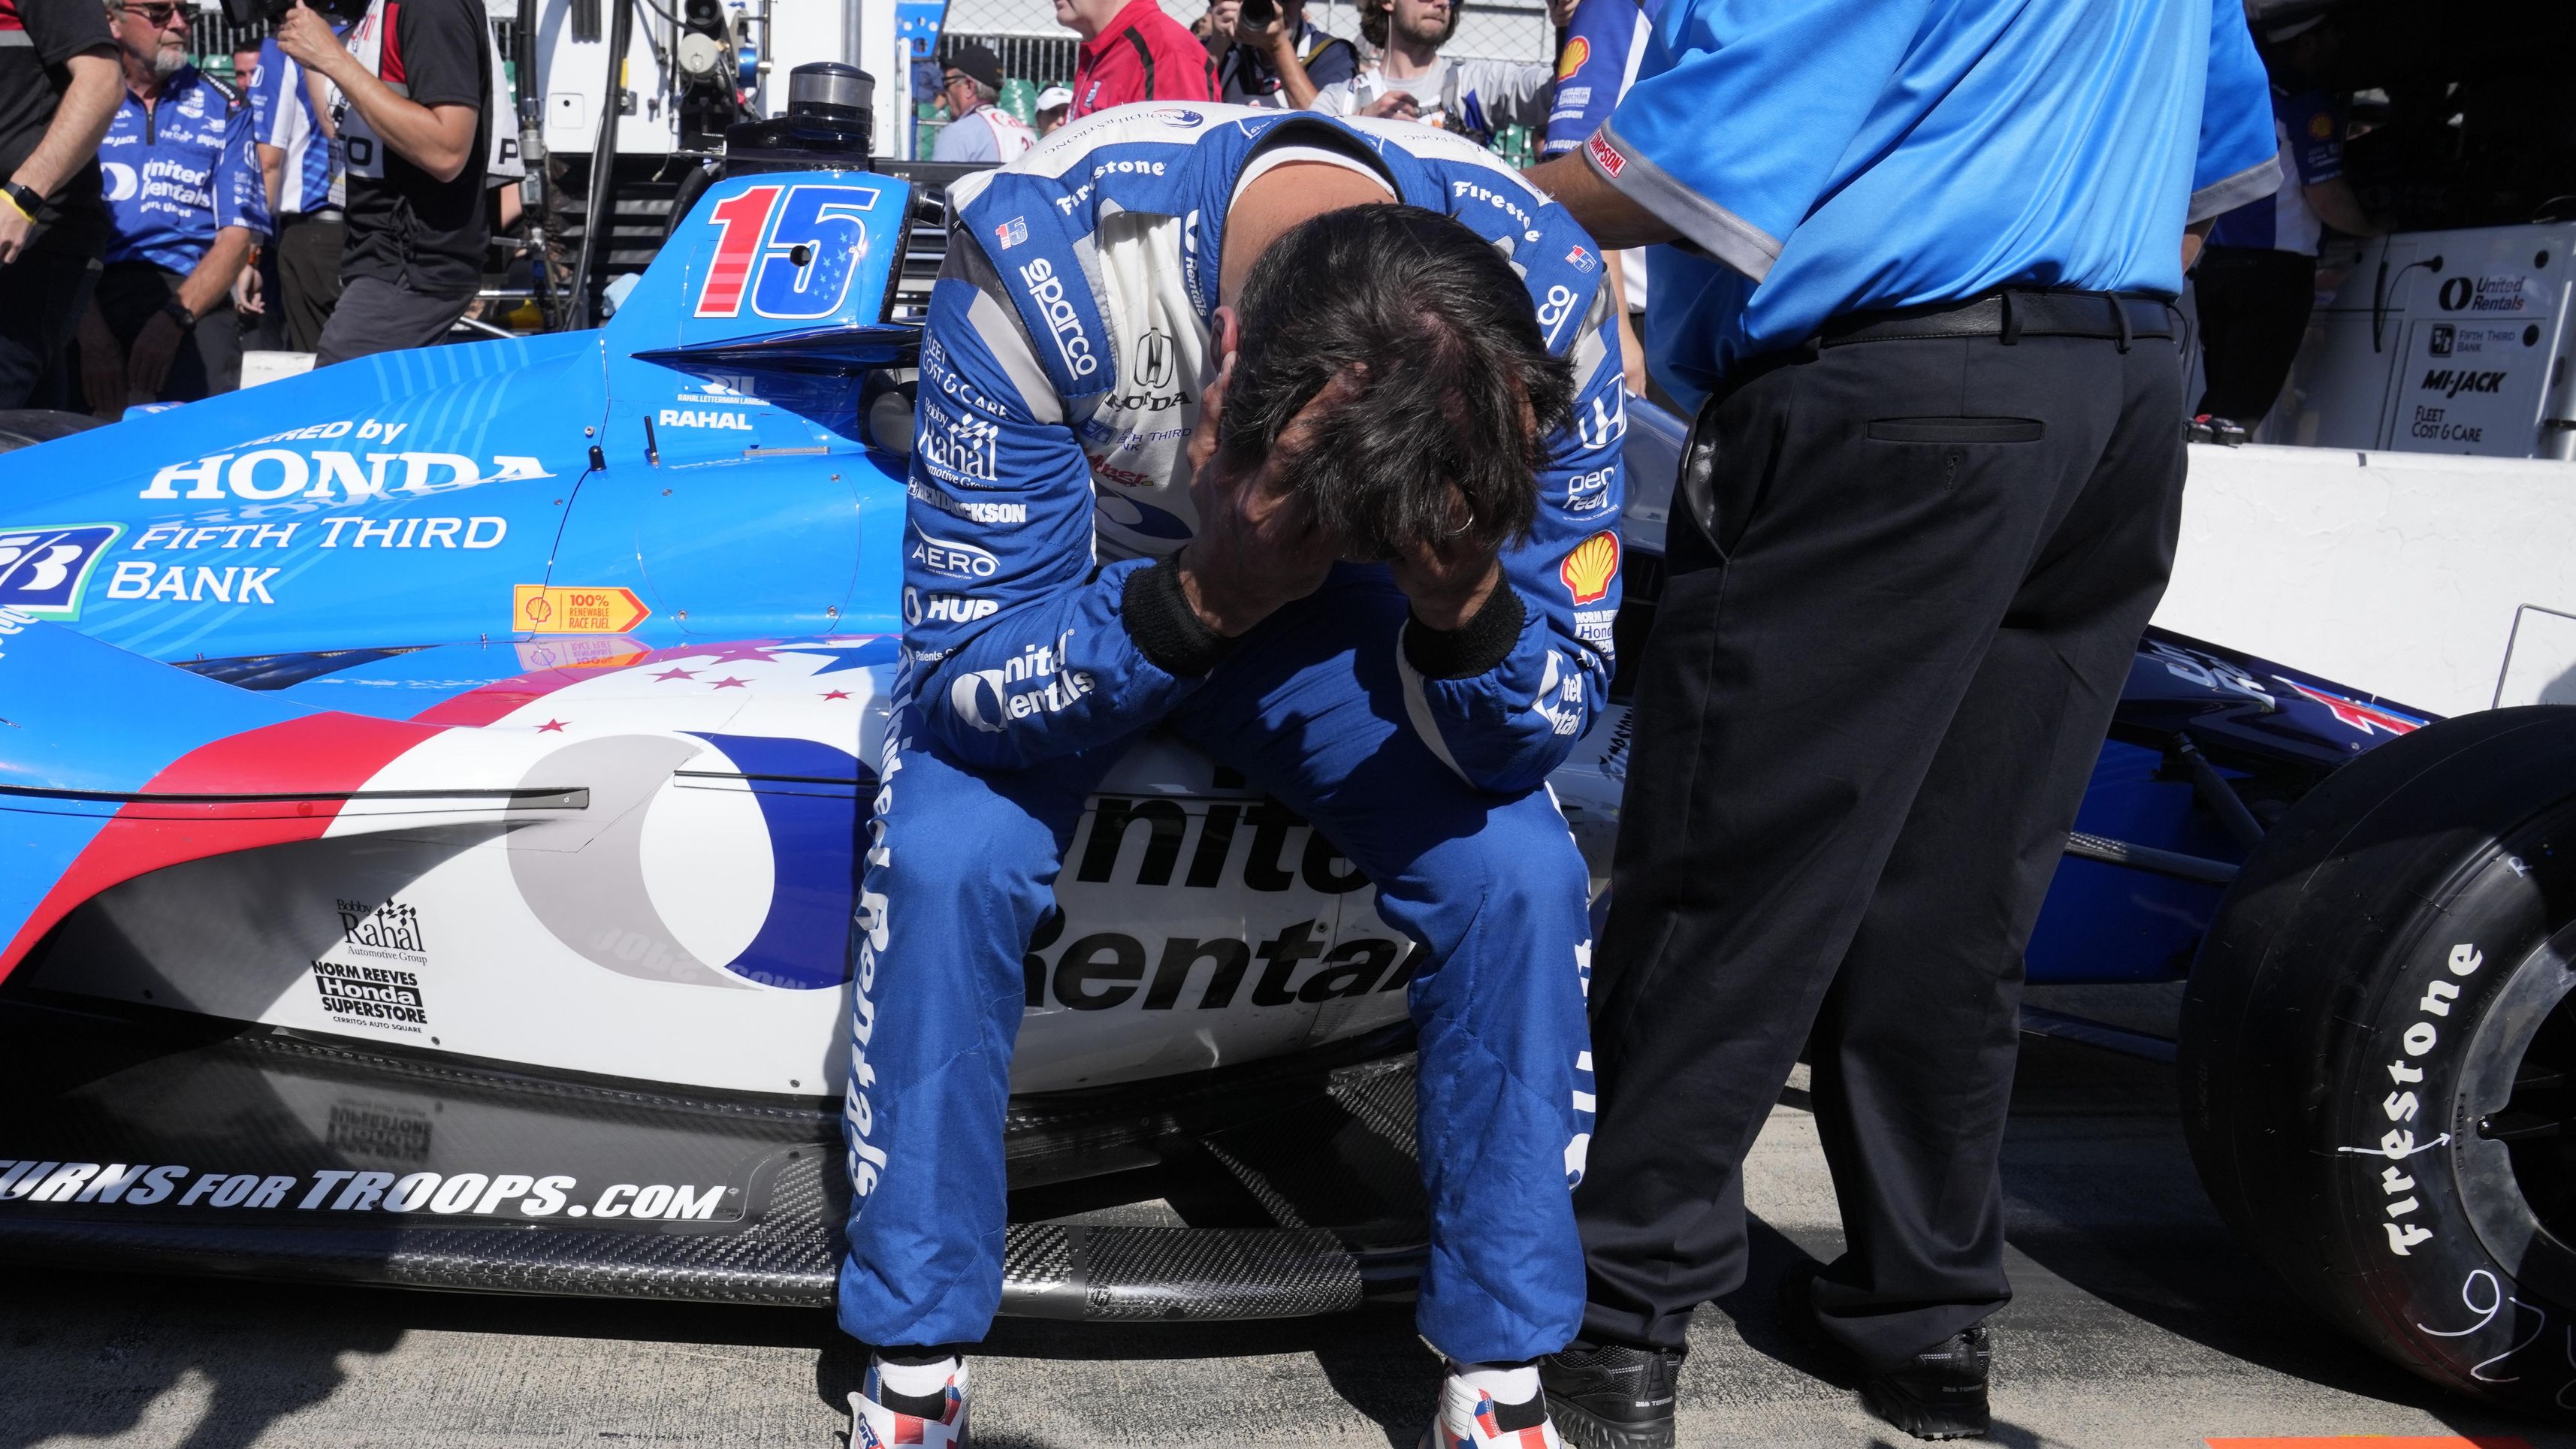 Graham Rahal sits on the side of his car after failing to make the field during qualifications for the Indianapolis 500.